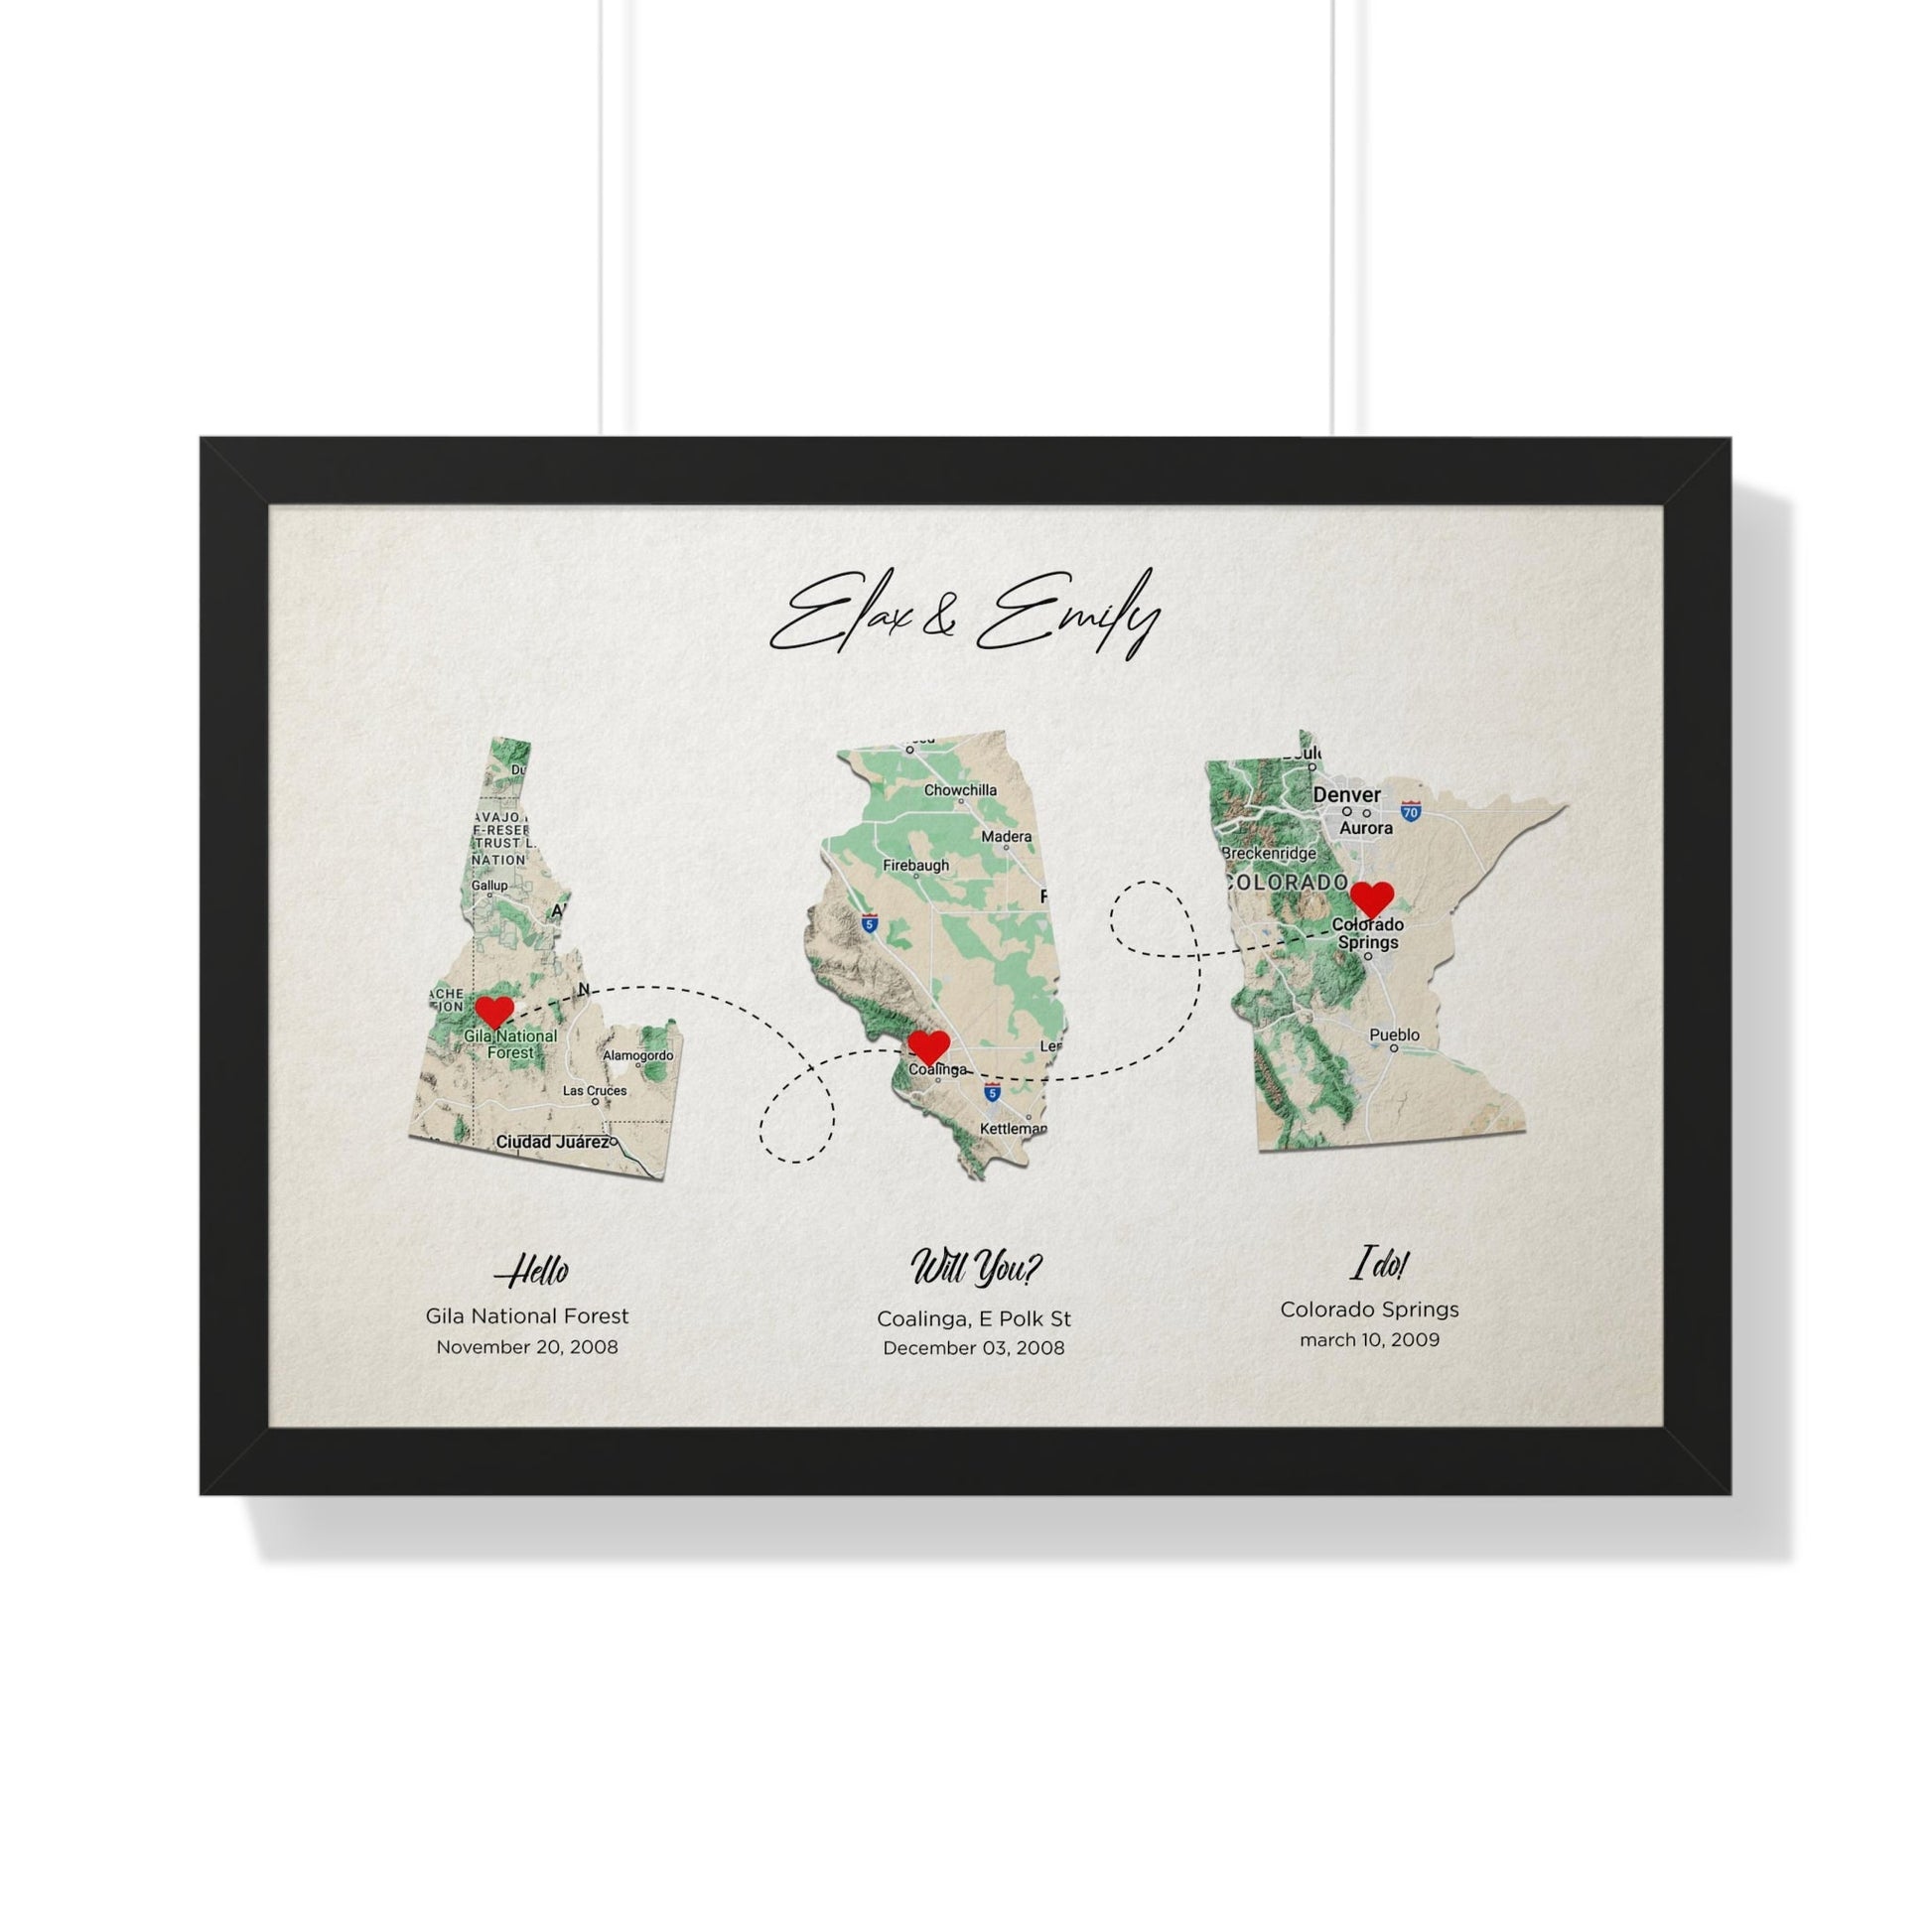 Abstract map art in elegant frame, a one-of-a-kind gift.